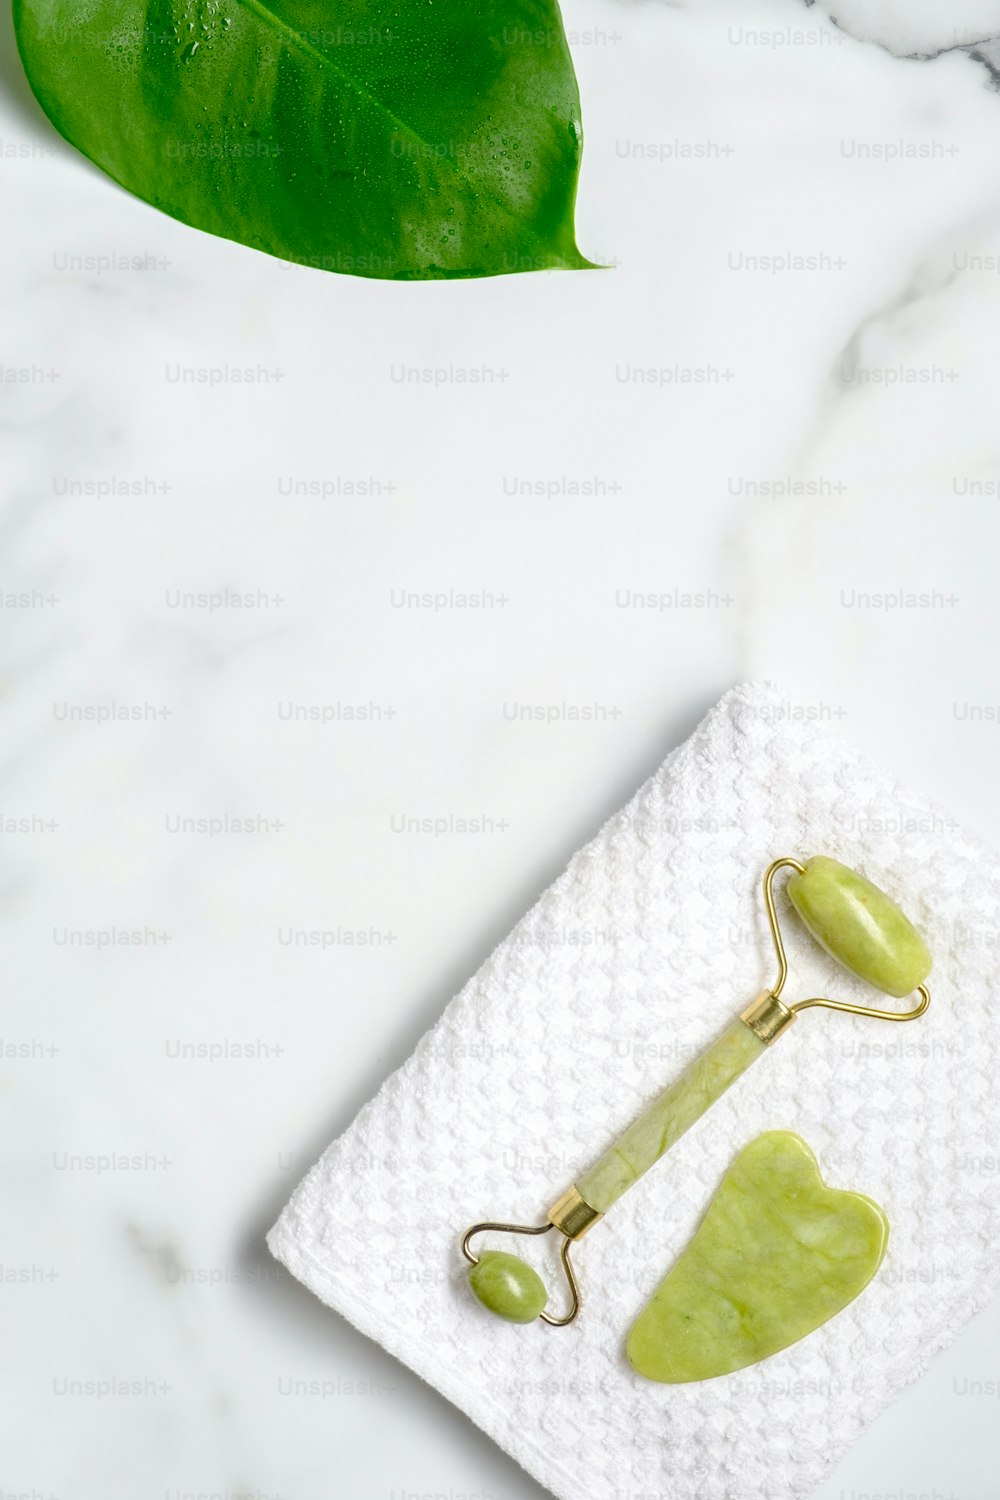 Jade stone facial roller and gua sha on towel on marble desk with green leaf. Facial skin care cosmetics set. Flat lay, top view.